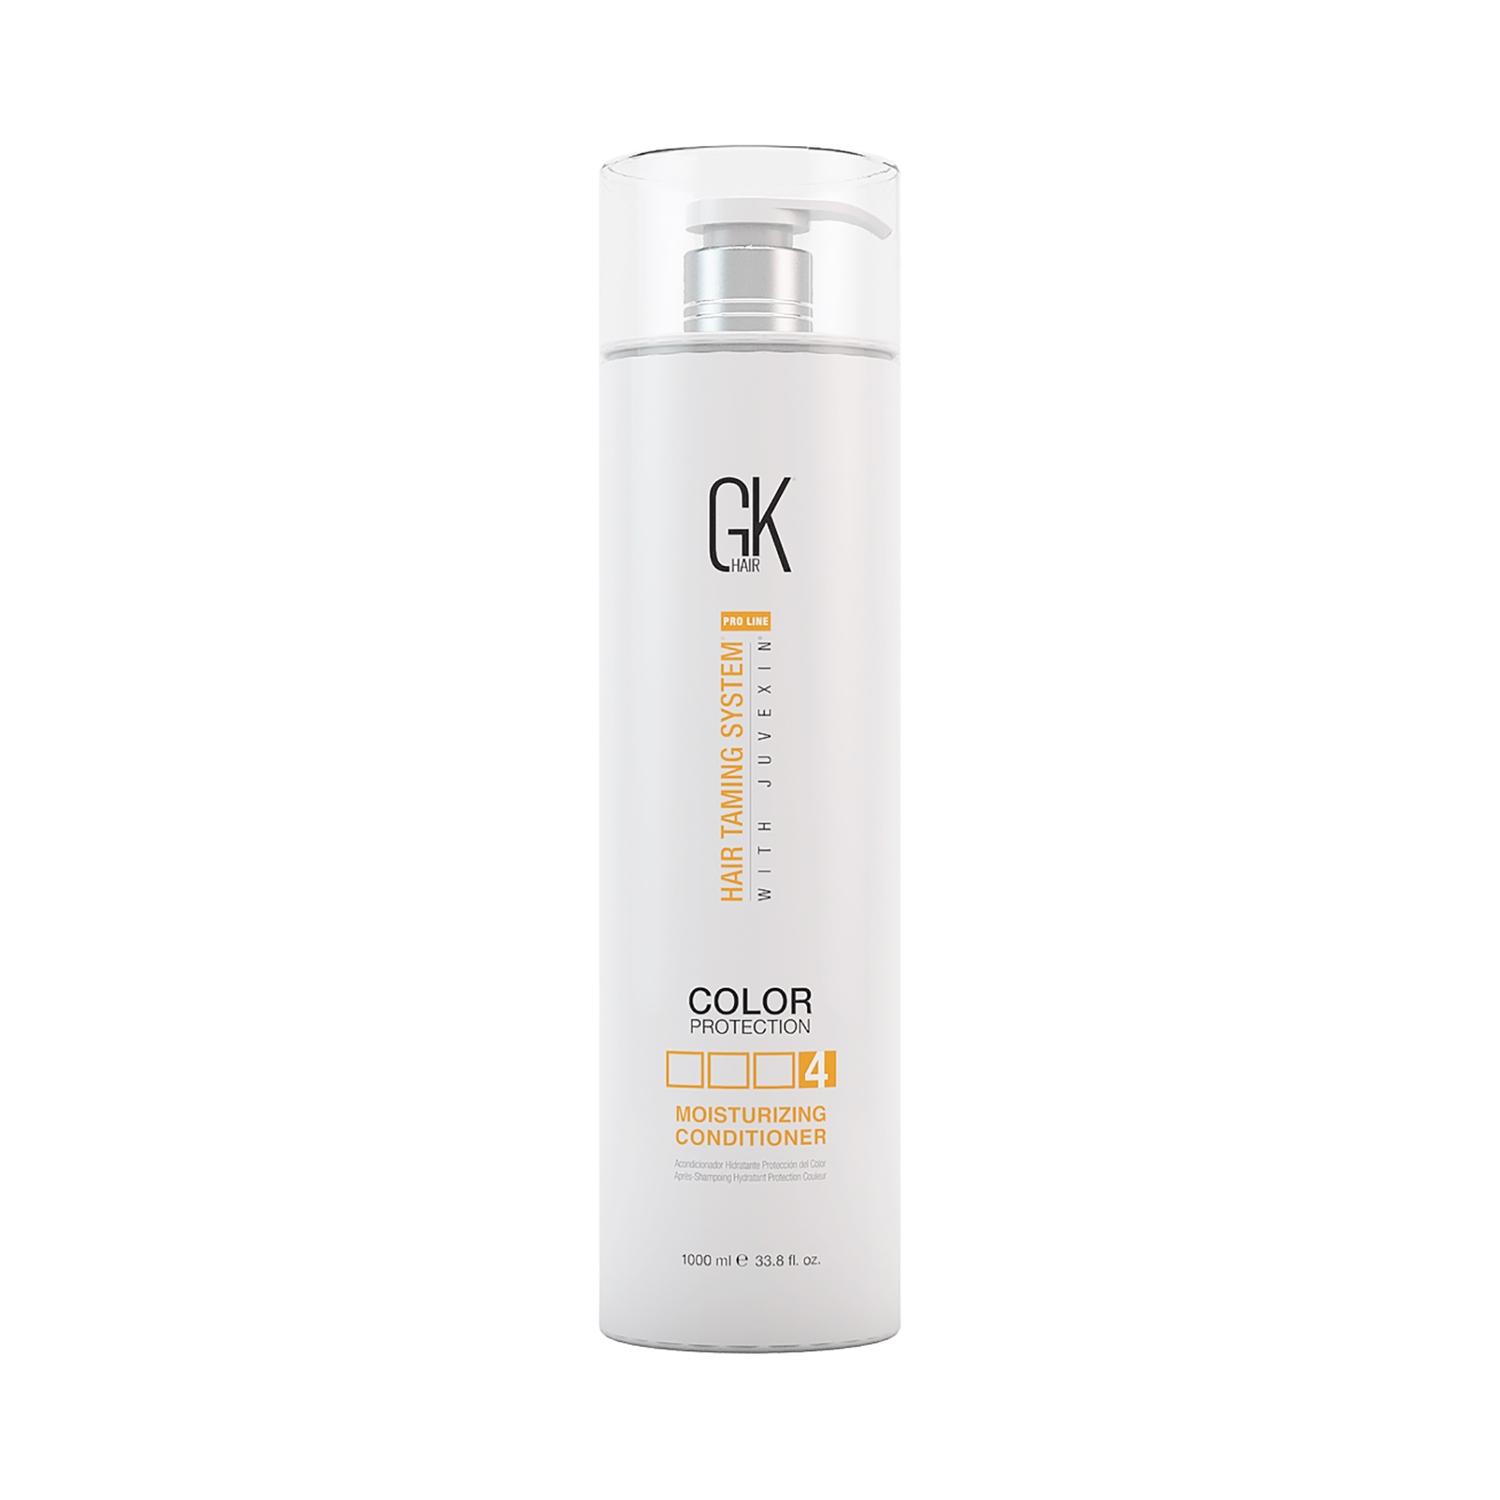 gk-hair-moisturizing-color-protection-conditioner-(1000ml)